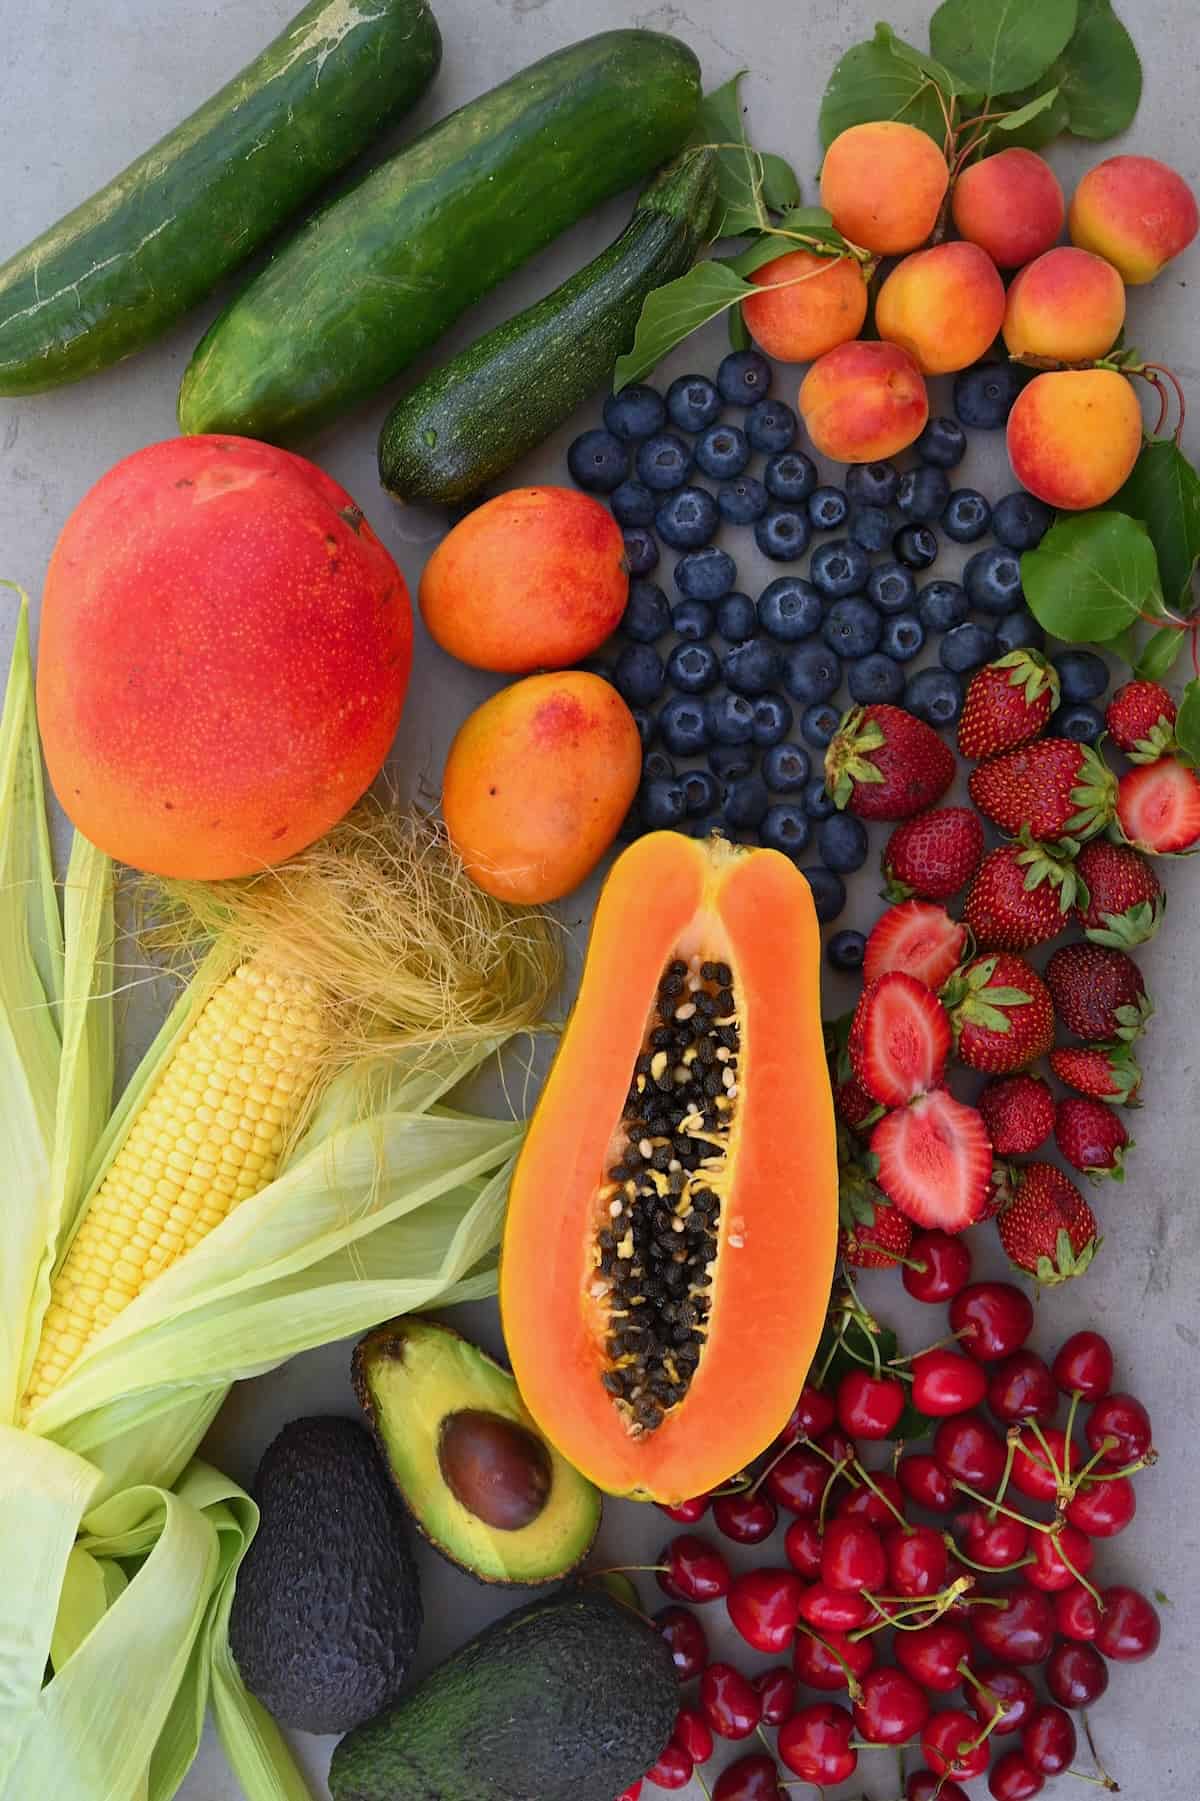 Different fruit and veggies that are in season in June